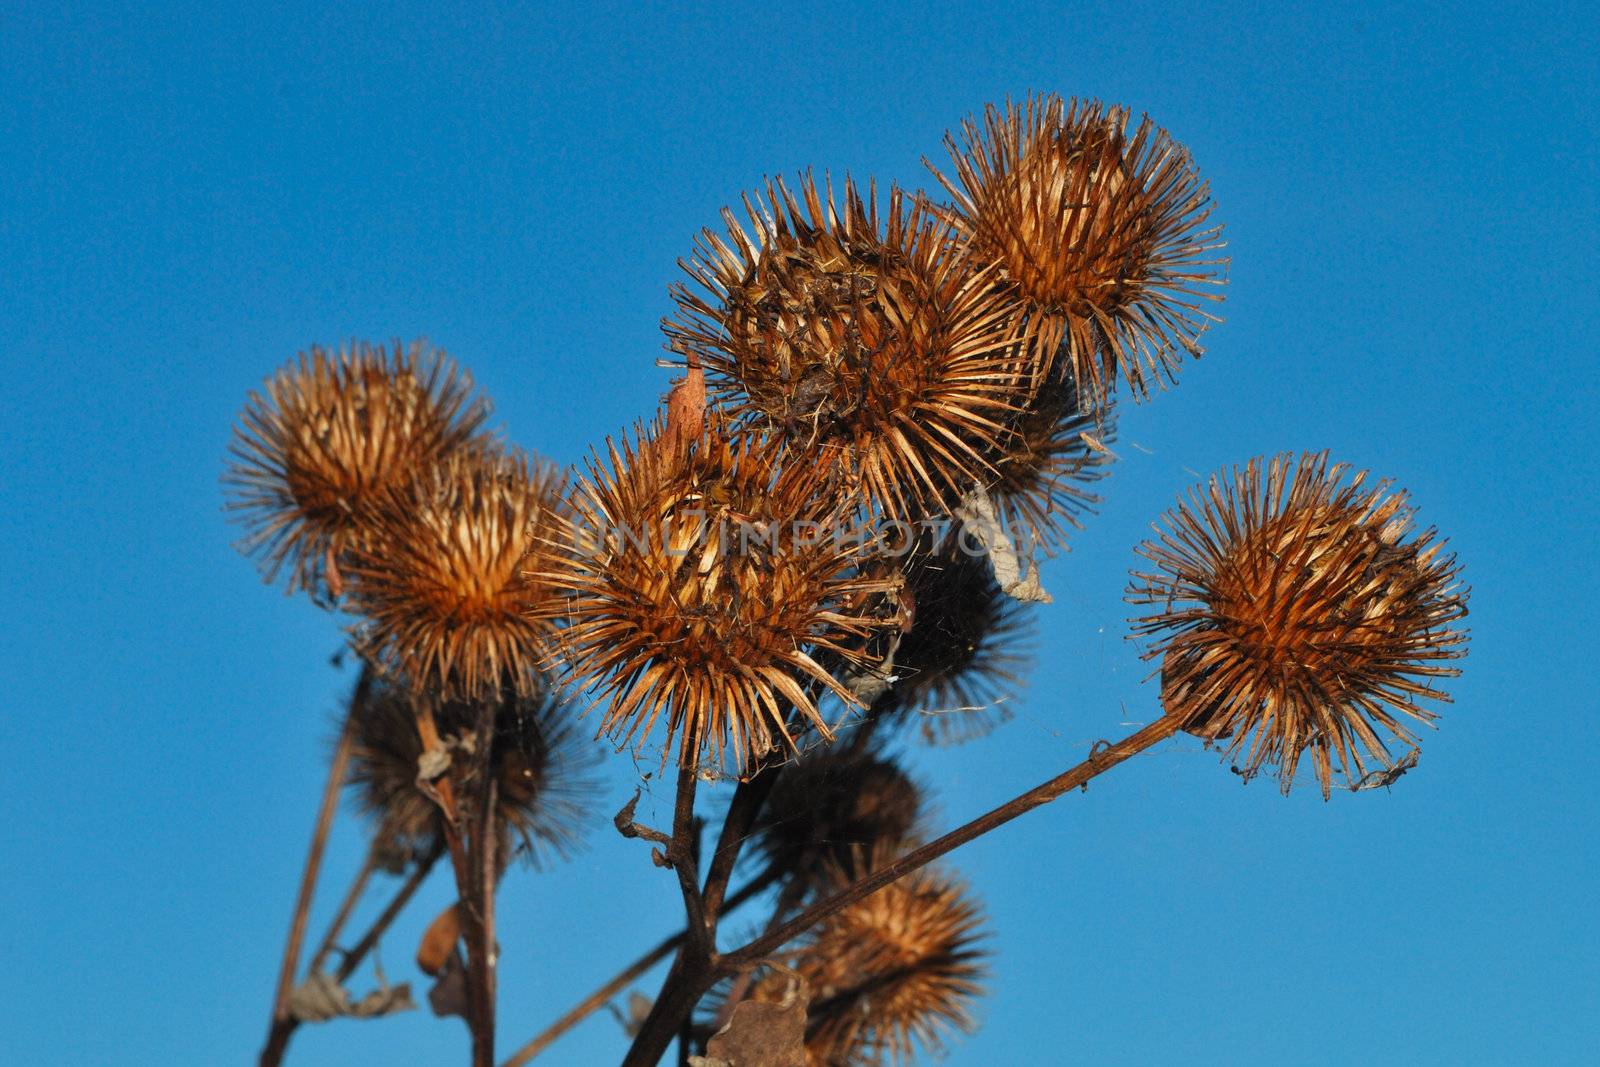 brown thistles with clear sky background